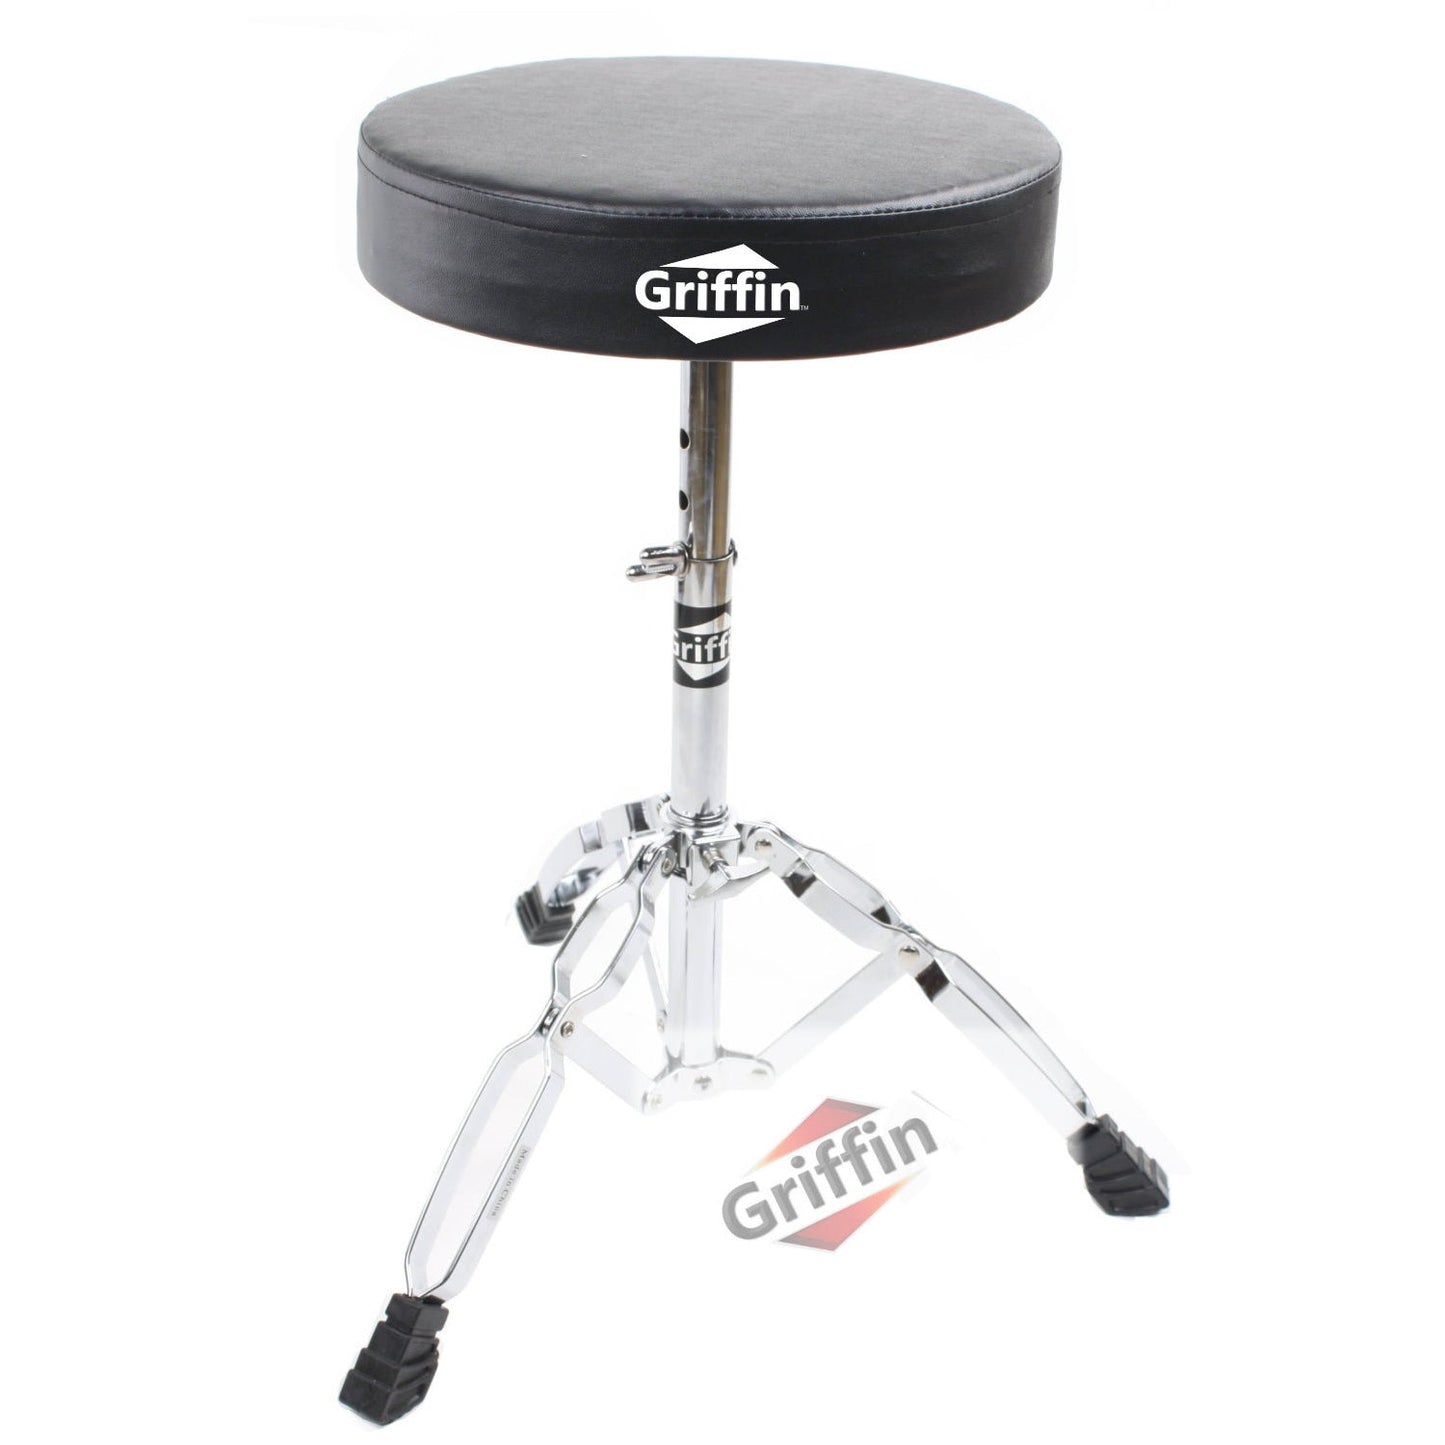 Complete Drum Hardware Pack 6 Piece Set by GRIFFIN - Full Kit Cymbal Stand, Drum Throne, Kick Pedal